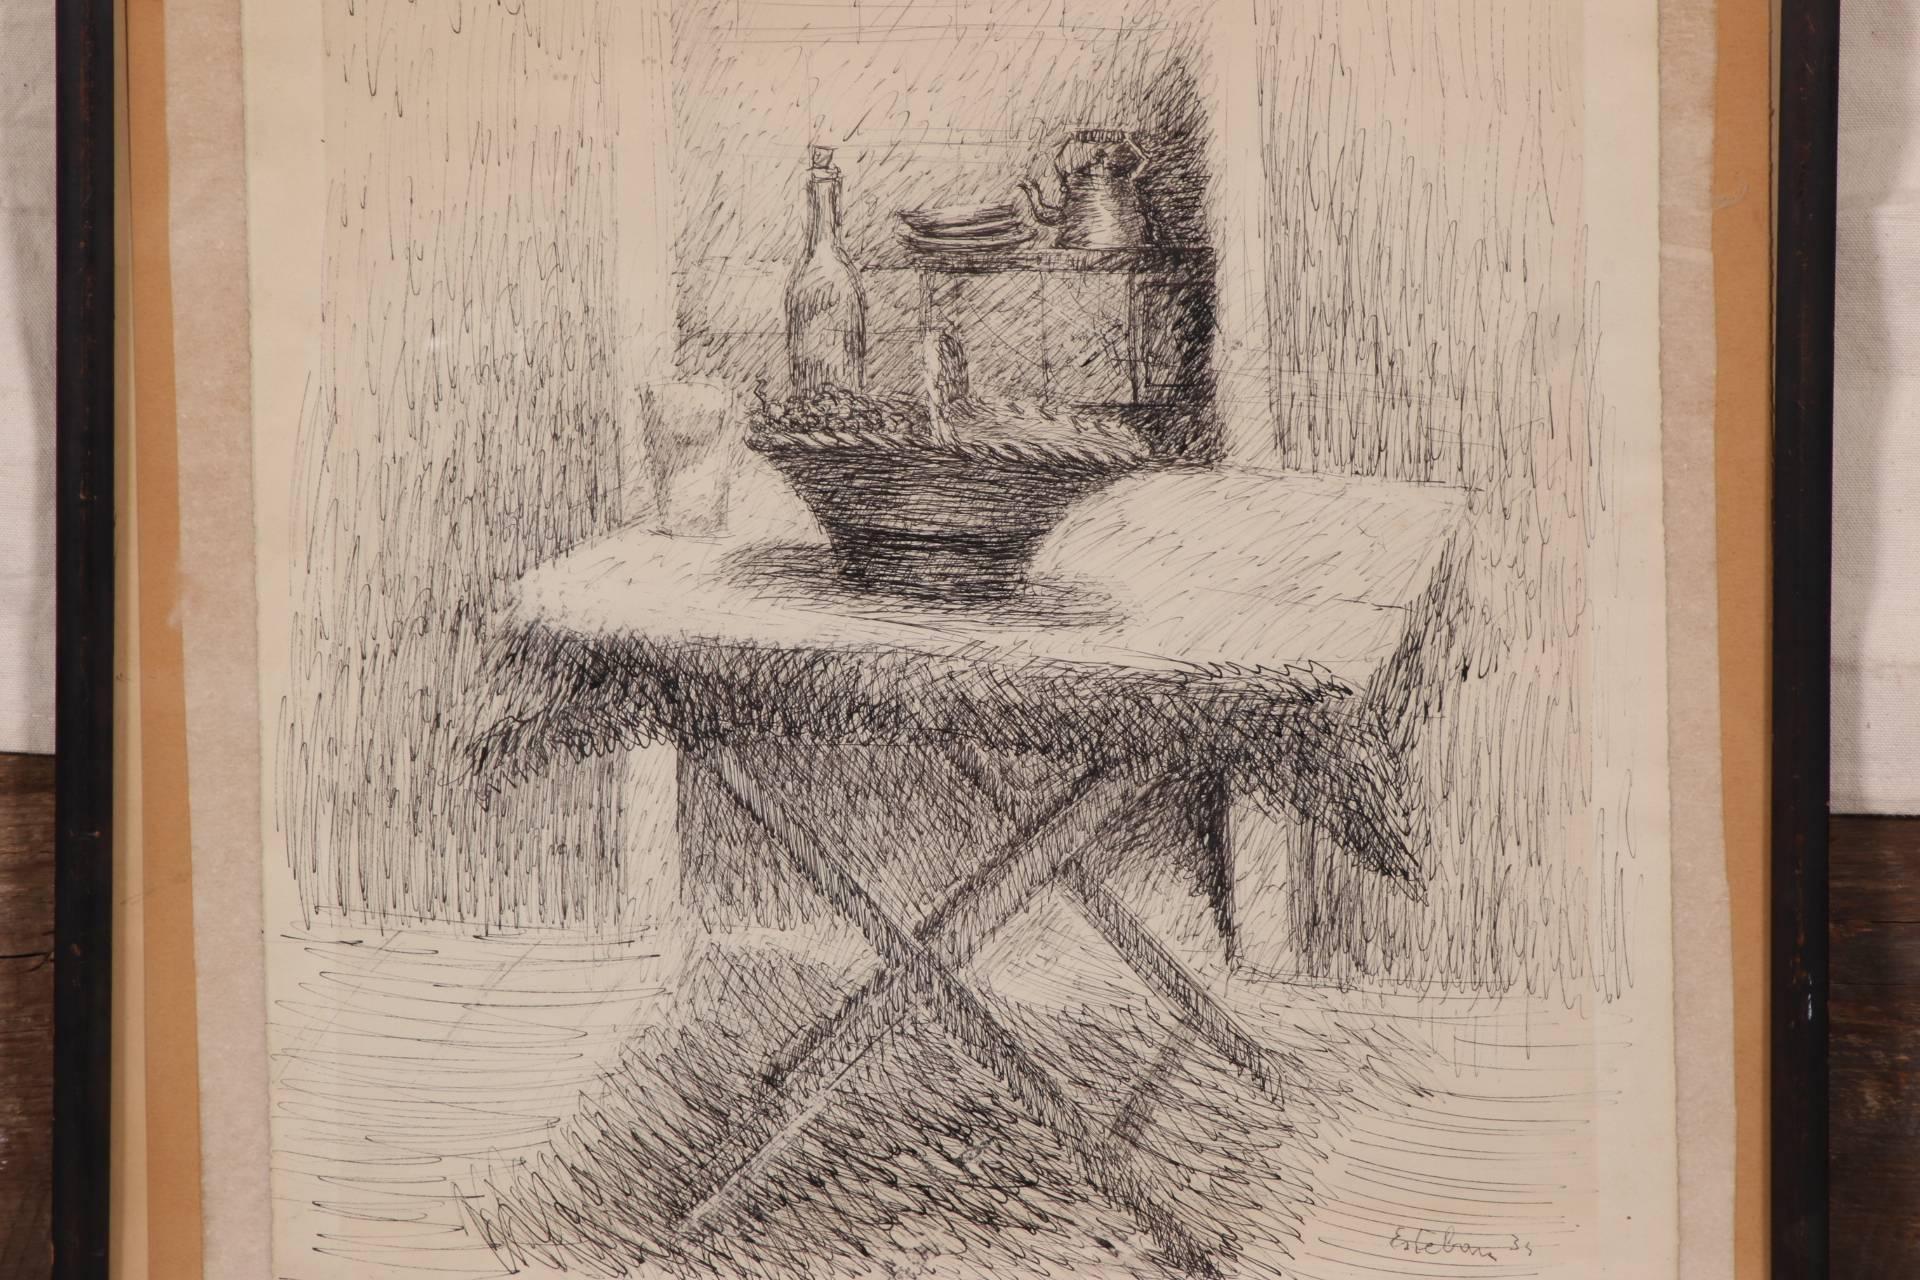 Pen and ink on paper. Still life with a table set with a basket and wine, in front of a cabinet with plates and a tea kettle.
Signed and dated 1934 in the lower right. Numbered 28 in pencil lower left corner. Taped to card at the top in the frame.